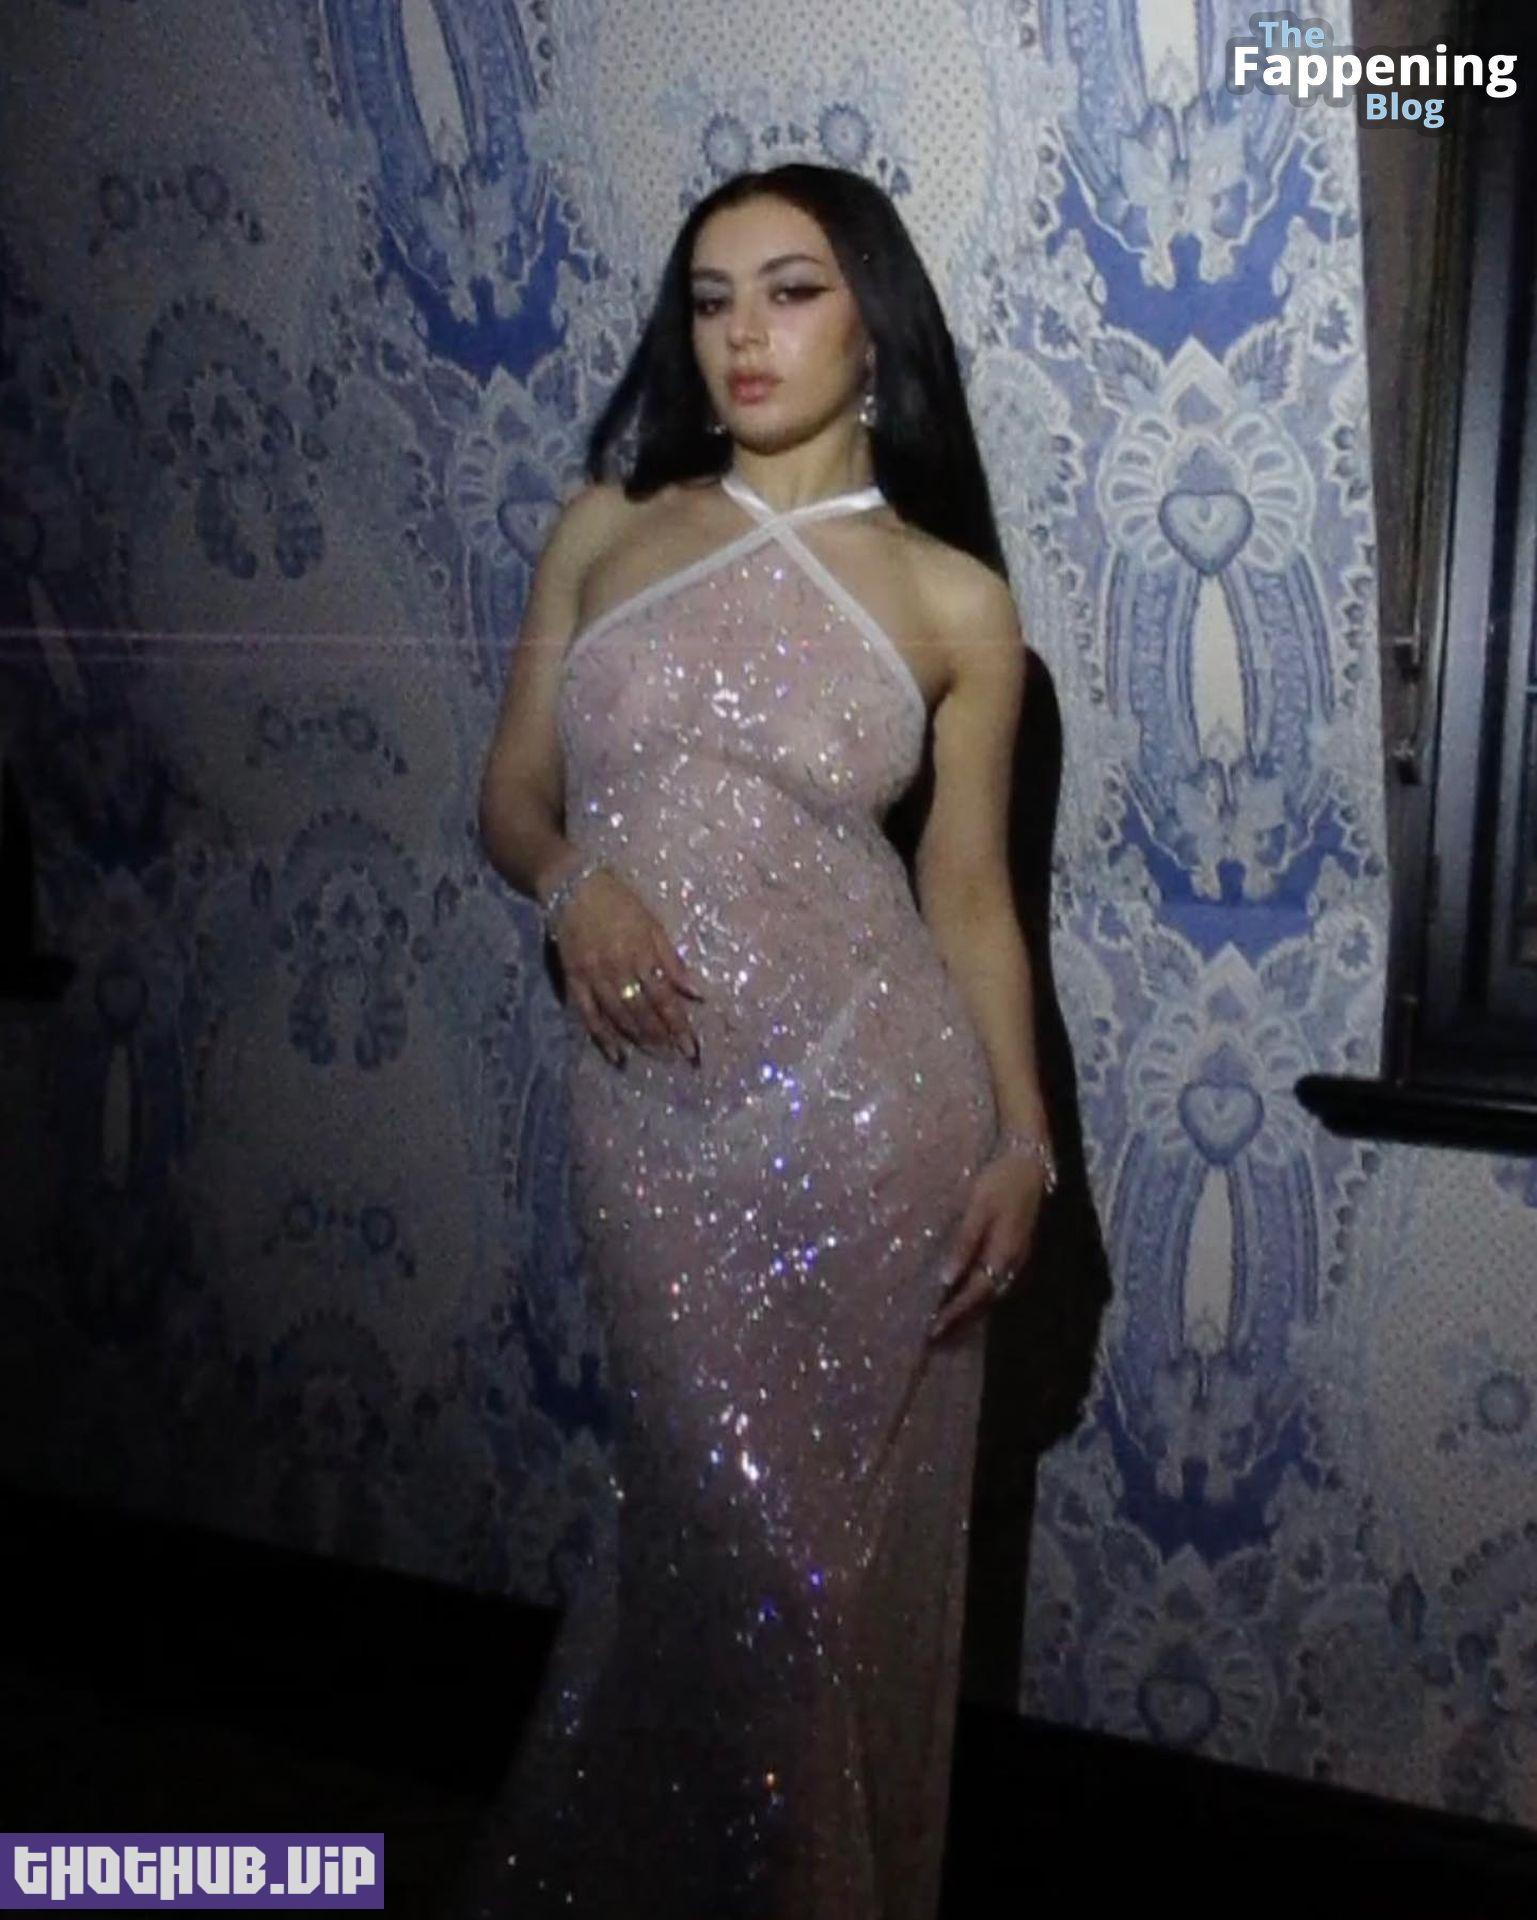 1712221103 819 Charli XCX See Through Nudity The Fappening Blog 1